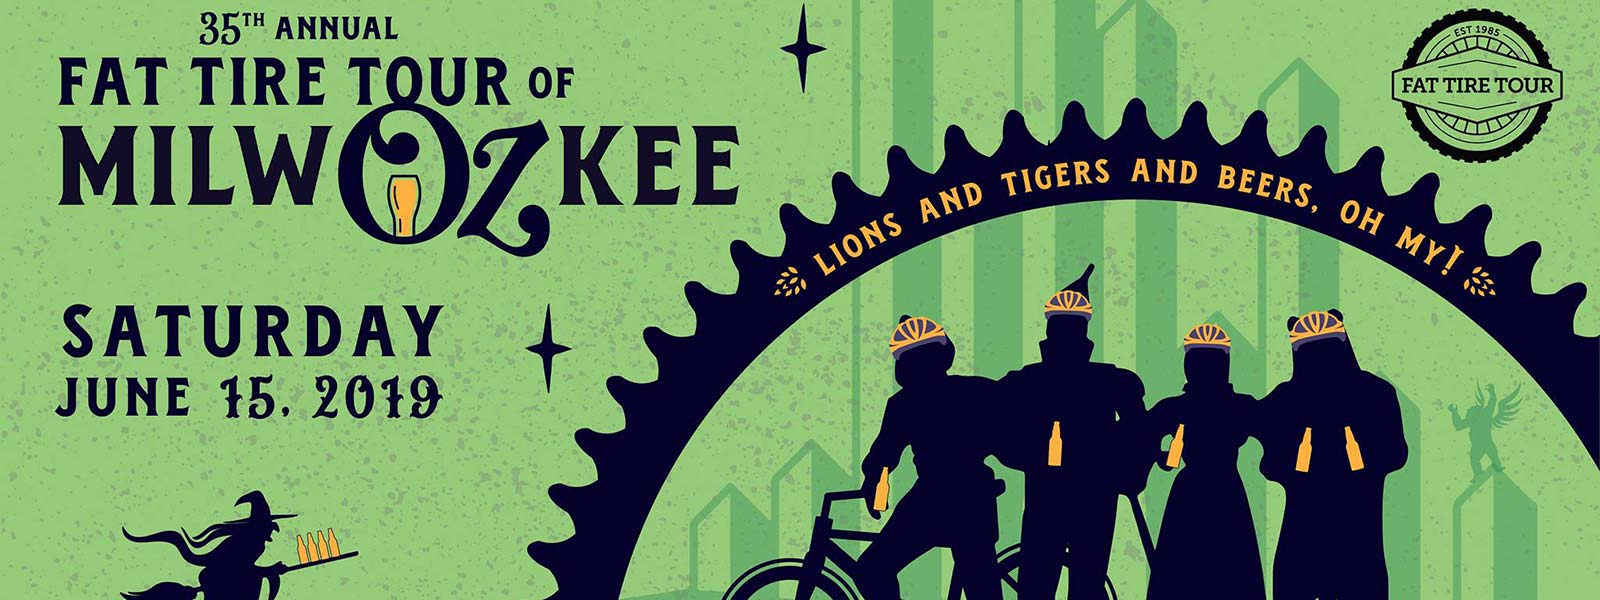 Join Everyday Cycles at the Fat Tire Tour of Milwaukee!